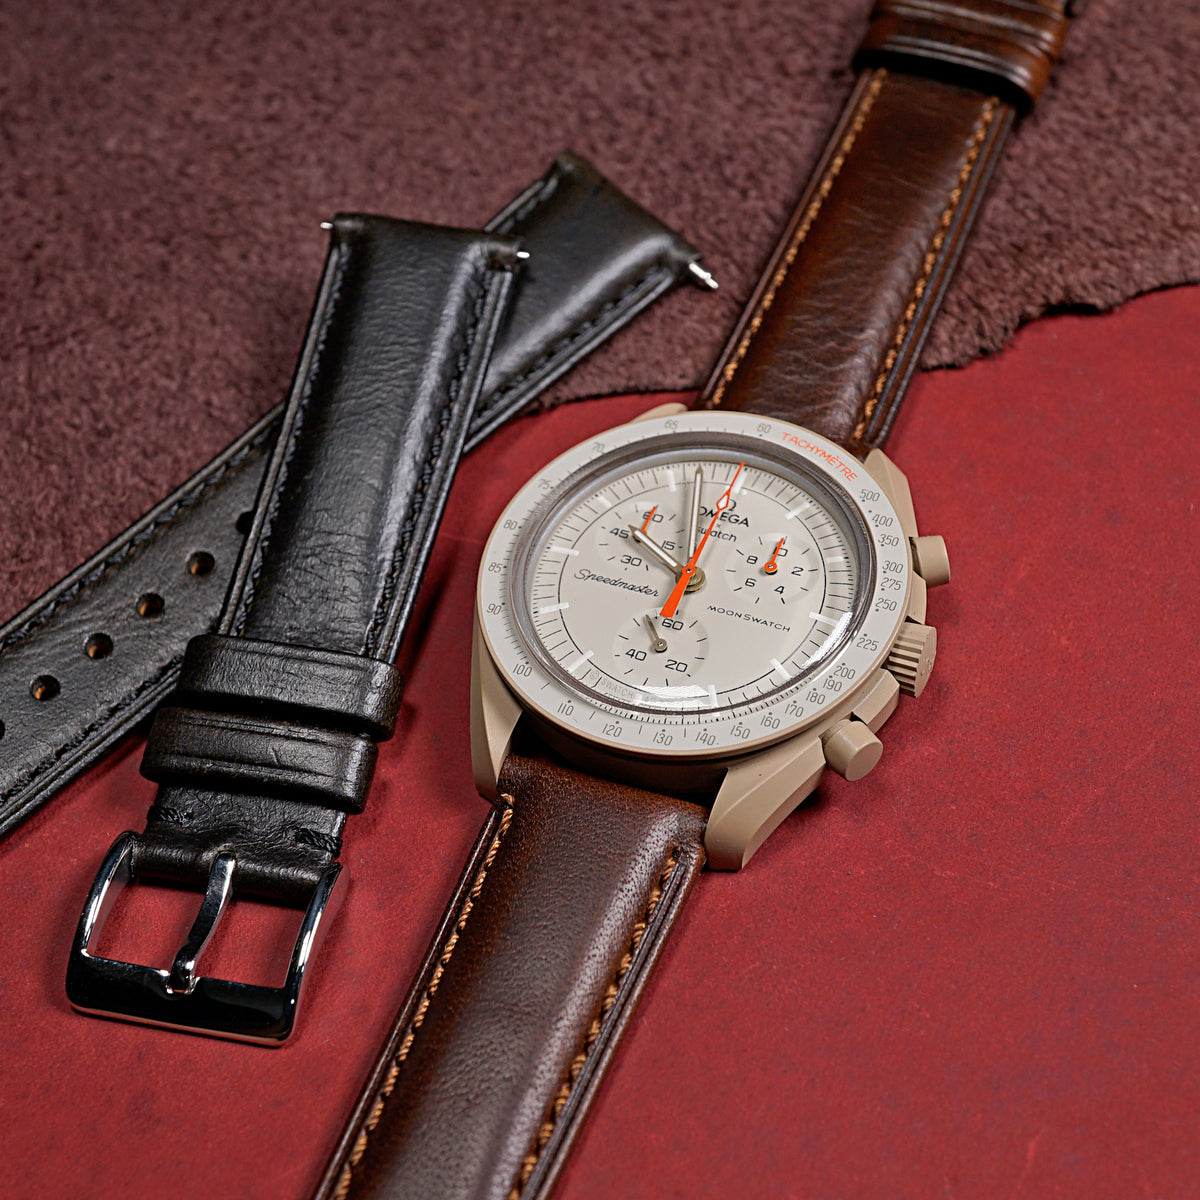 M3 Smooth Leather Watch Strap in Brown - Nomad Watch Works SG